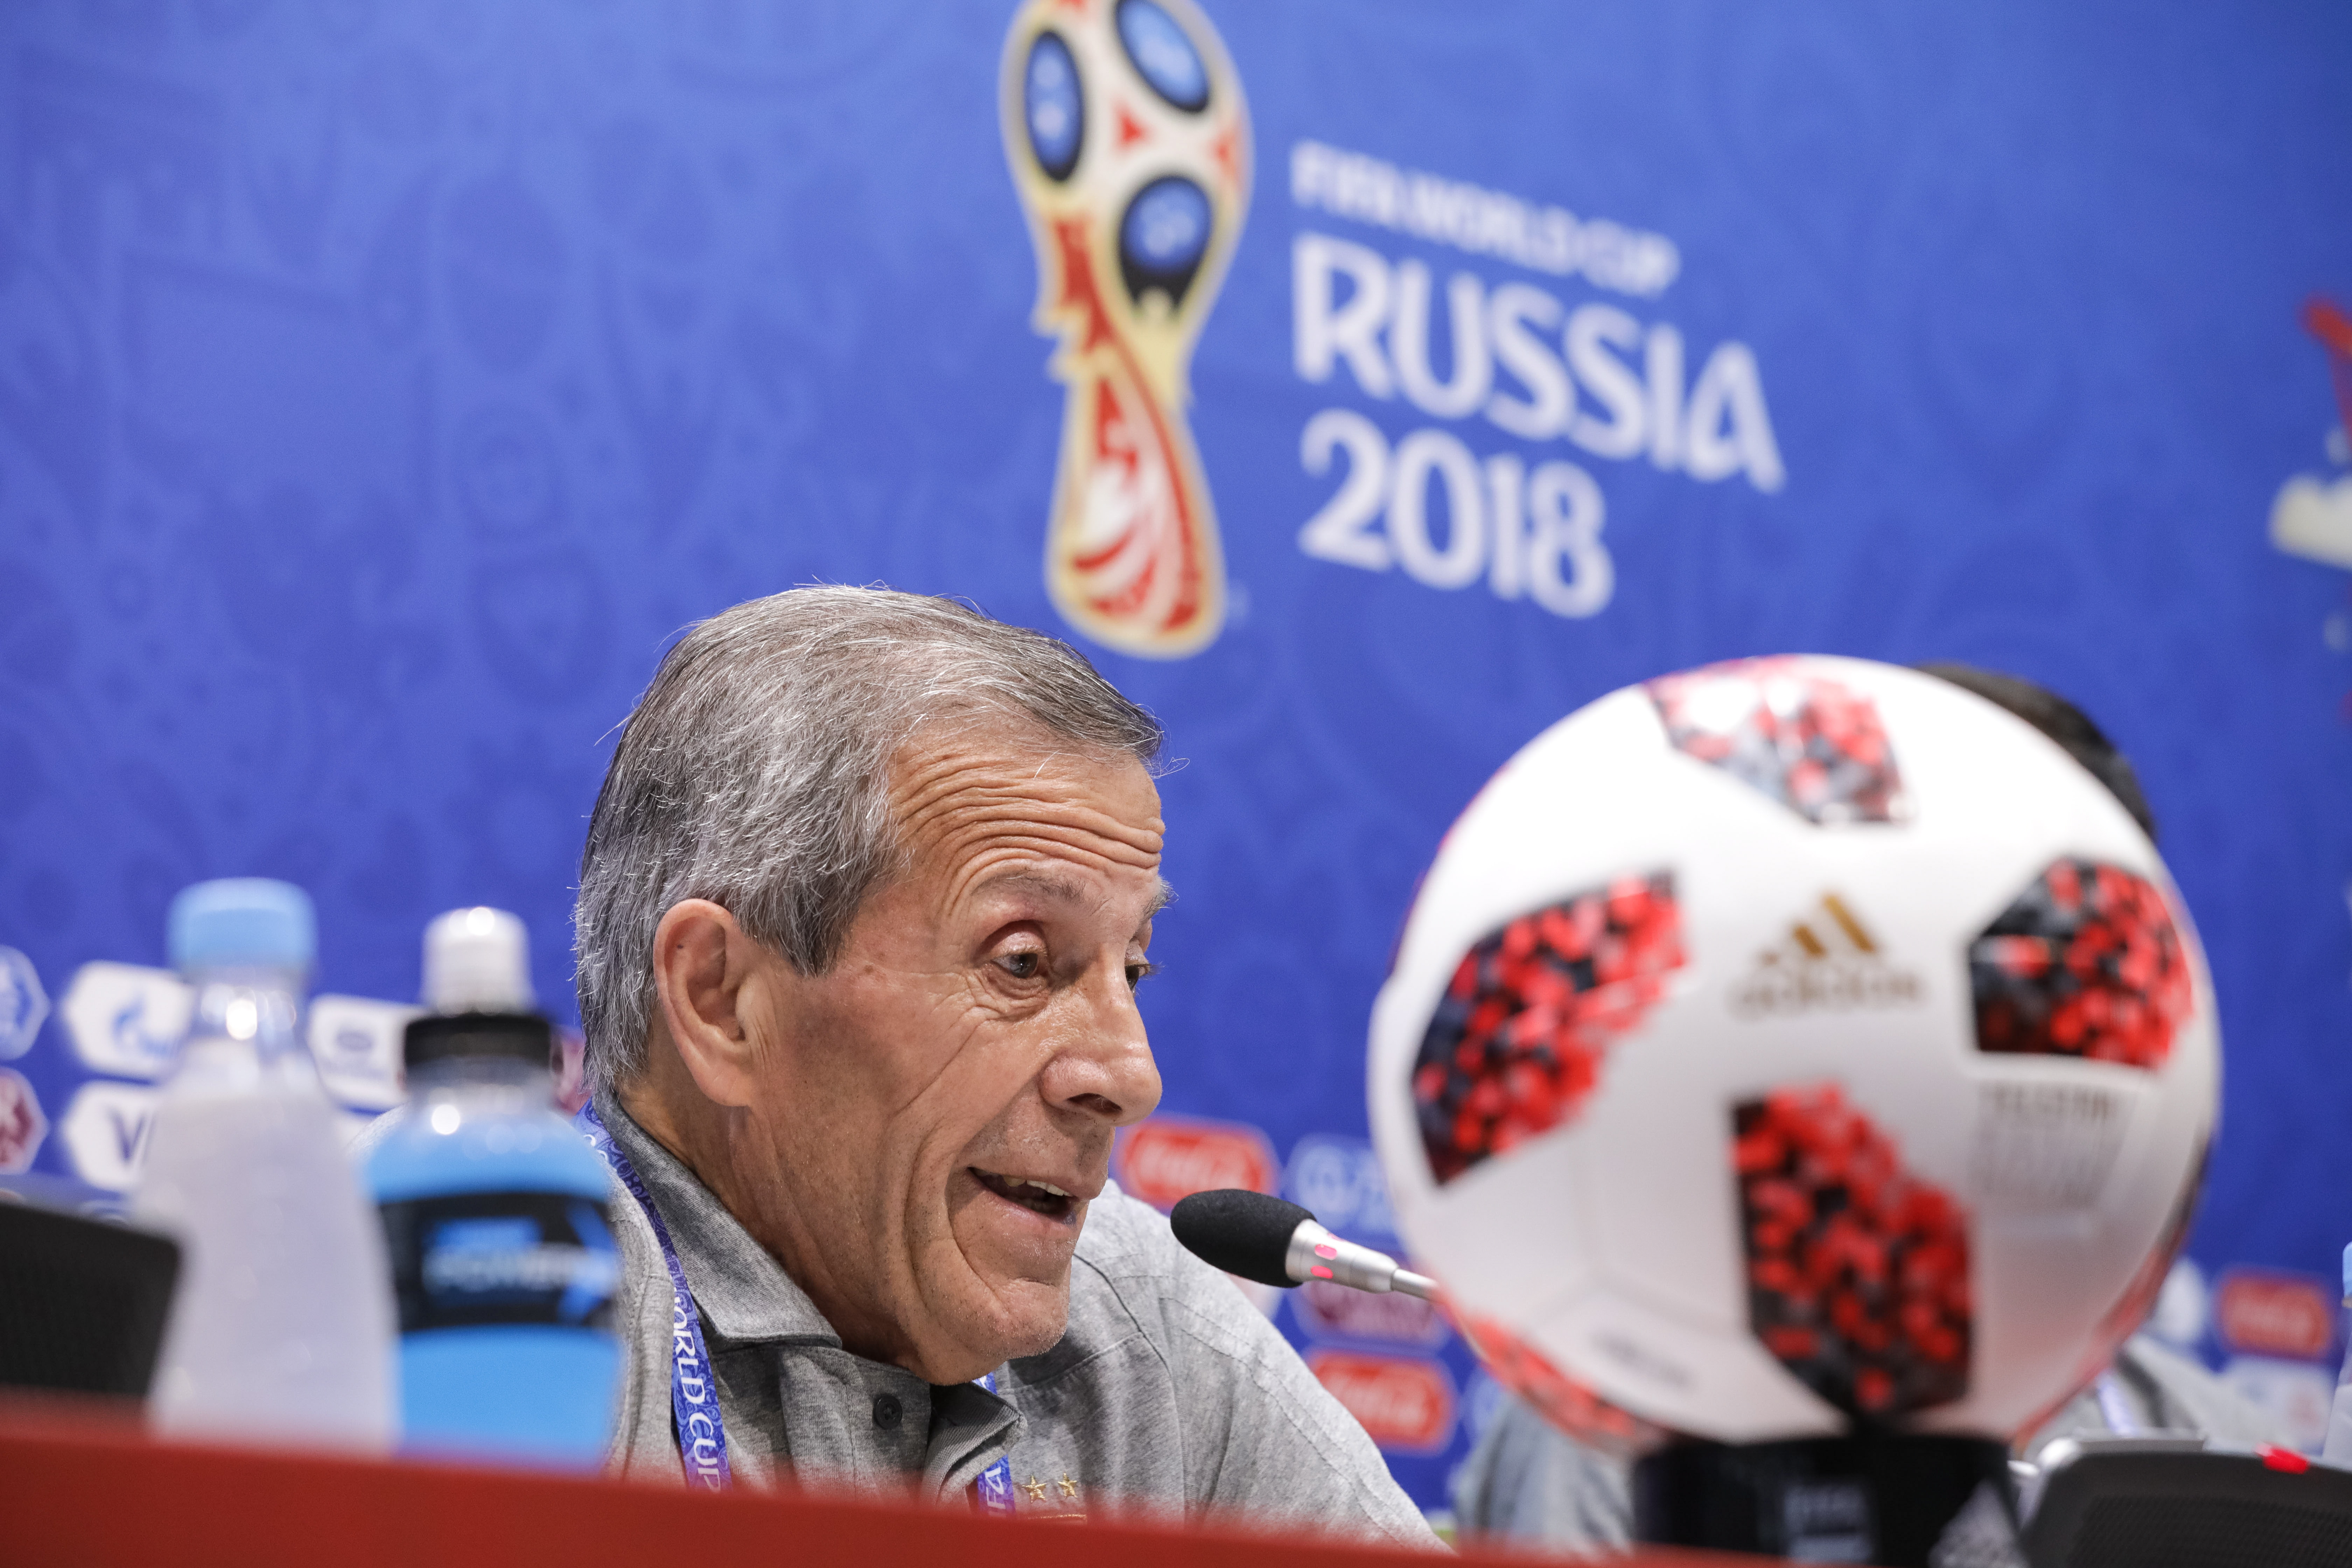 epa06850138 Uruguay's head coach Oscar Tabarez attends a press conference at the Fisht Stadium in Sochi, Russia, 29 June 2018. Uruguay will face Portugal in the Round of 16 of the FIFA World Cup 2018 on 30 June.  EPA/PAULO NOVAIS   EDITORIAL USE ONLY